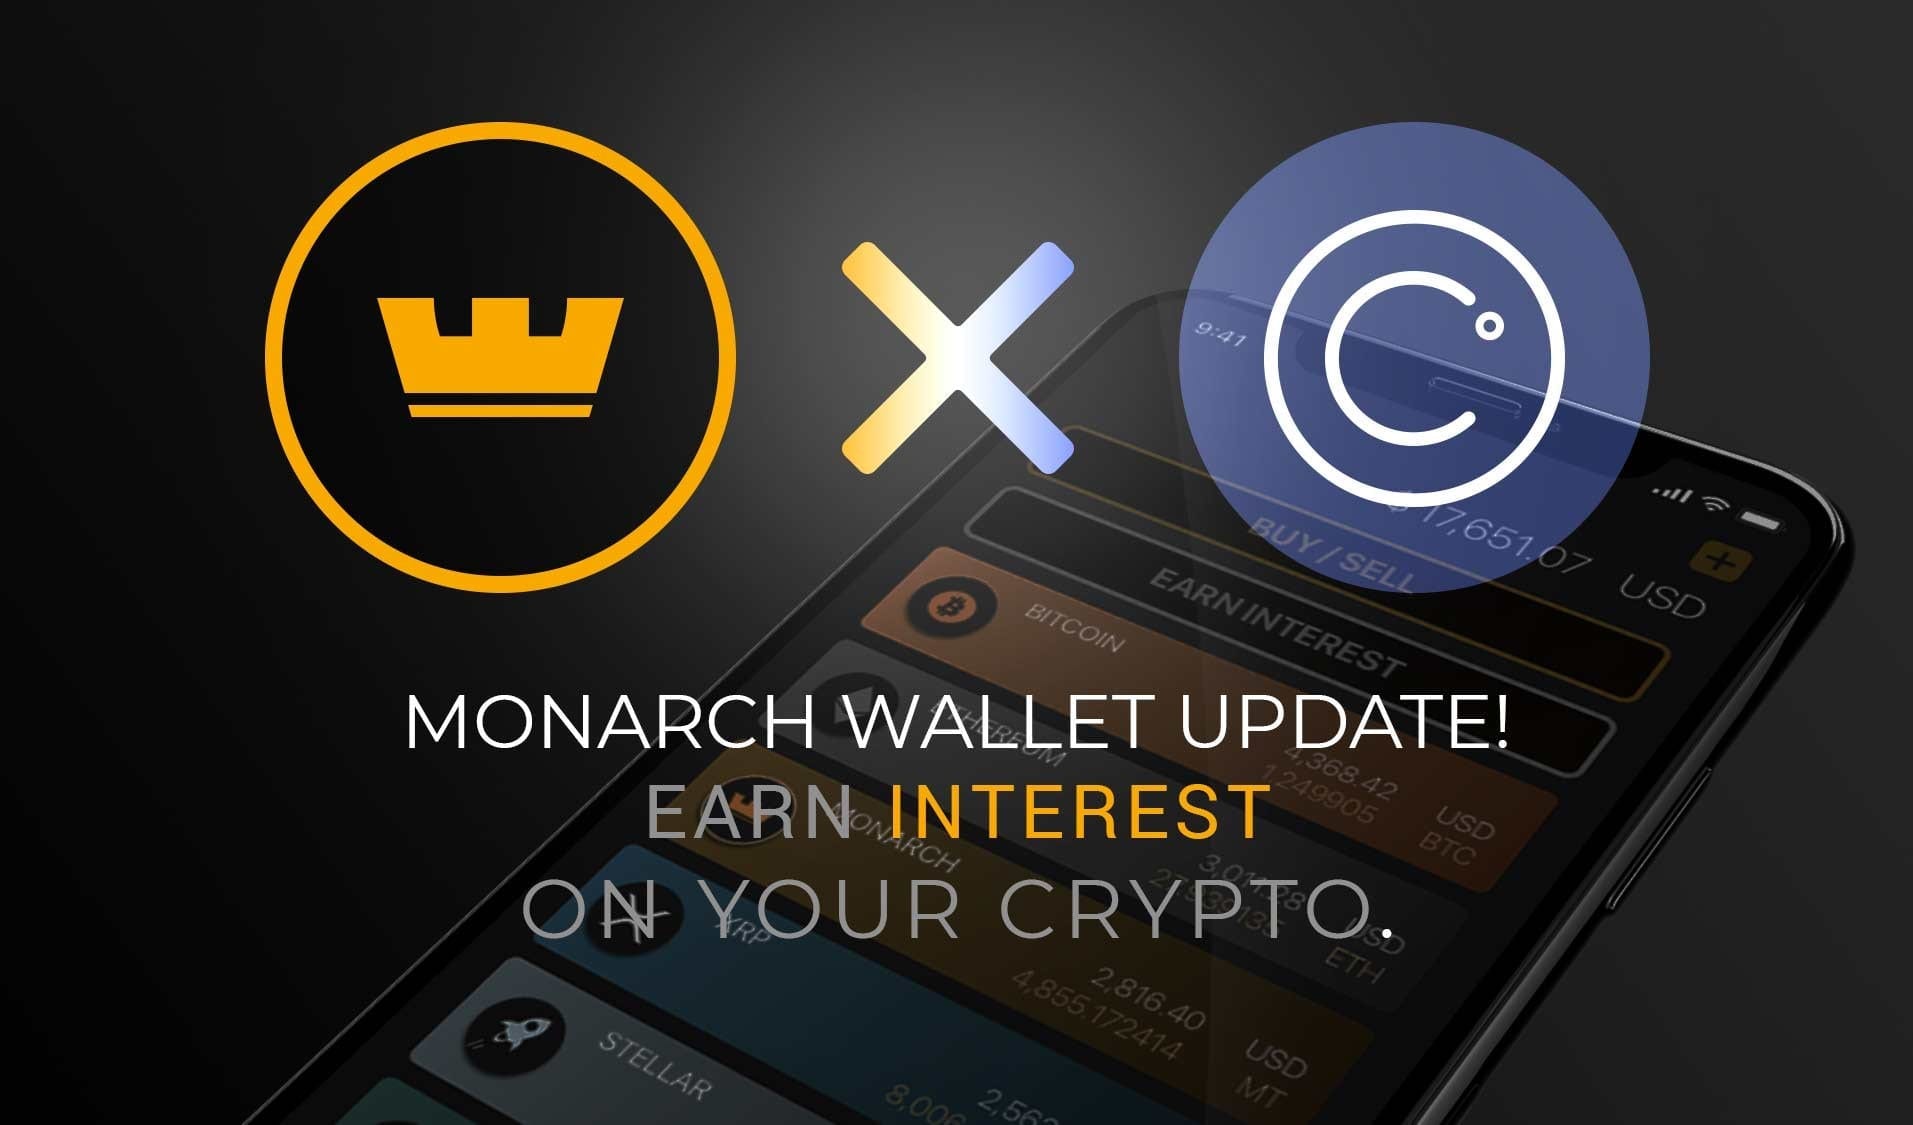 Monarch Wallet App Update Brings Users Up To 7% APR Interest With Crypto